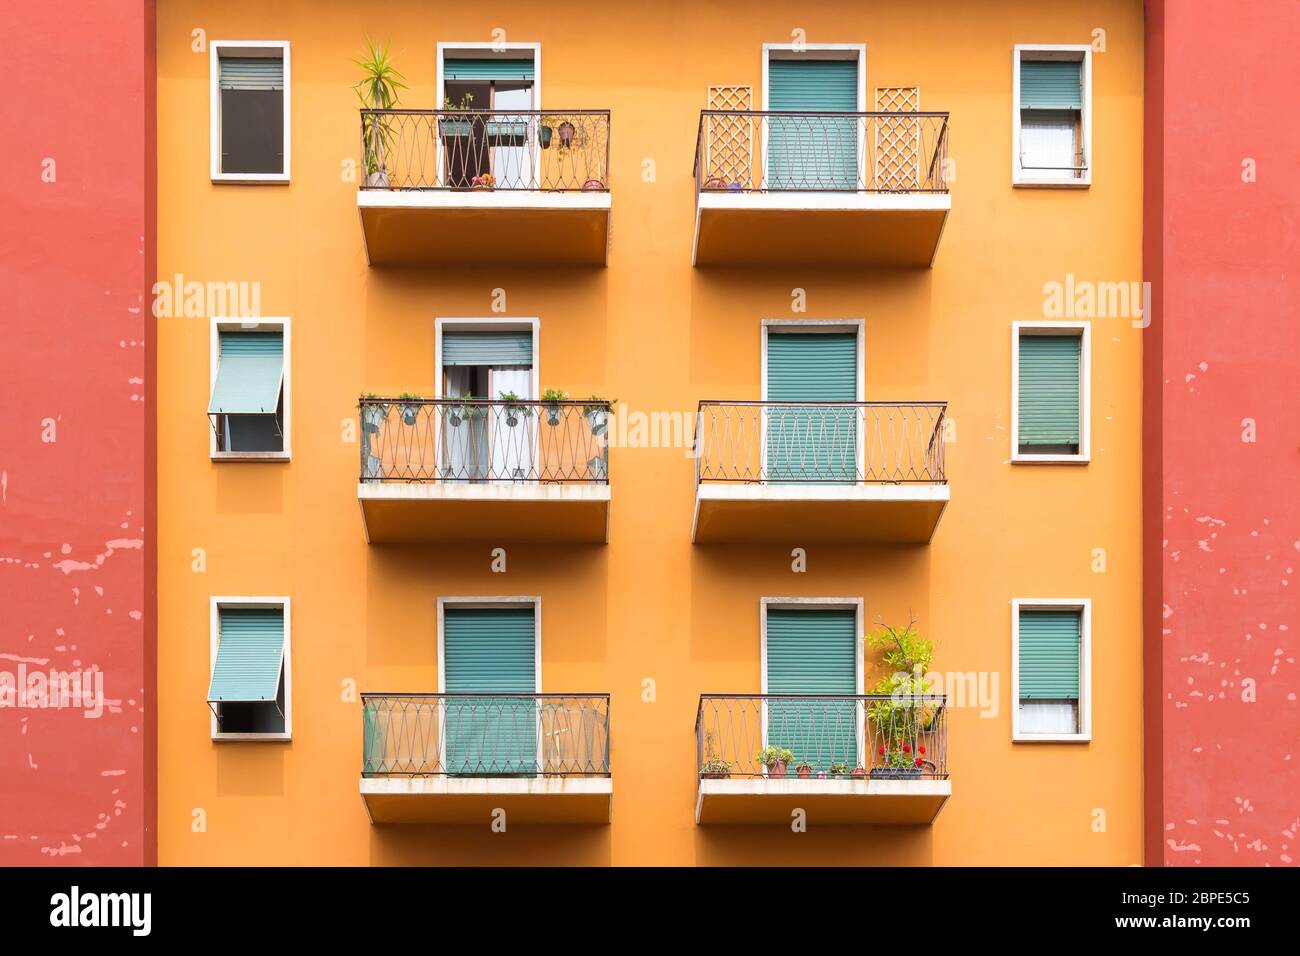 Bright colorful facade of old European building with windows, balconies and flowers in Verona, Italy. Laconic minimalist concept Stock Photo